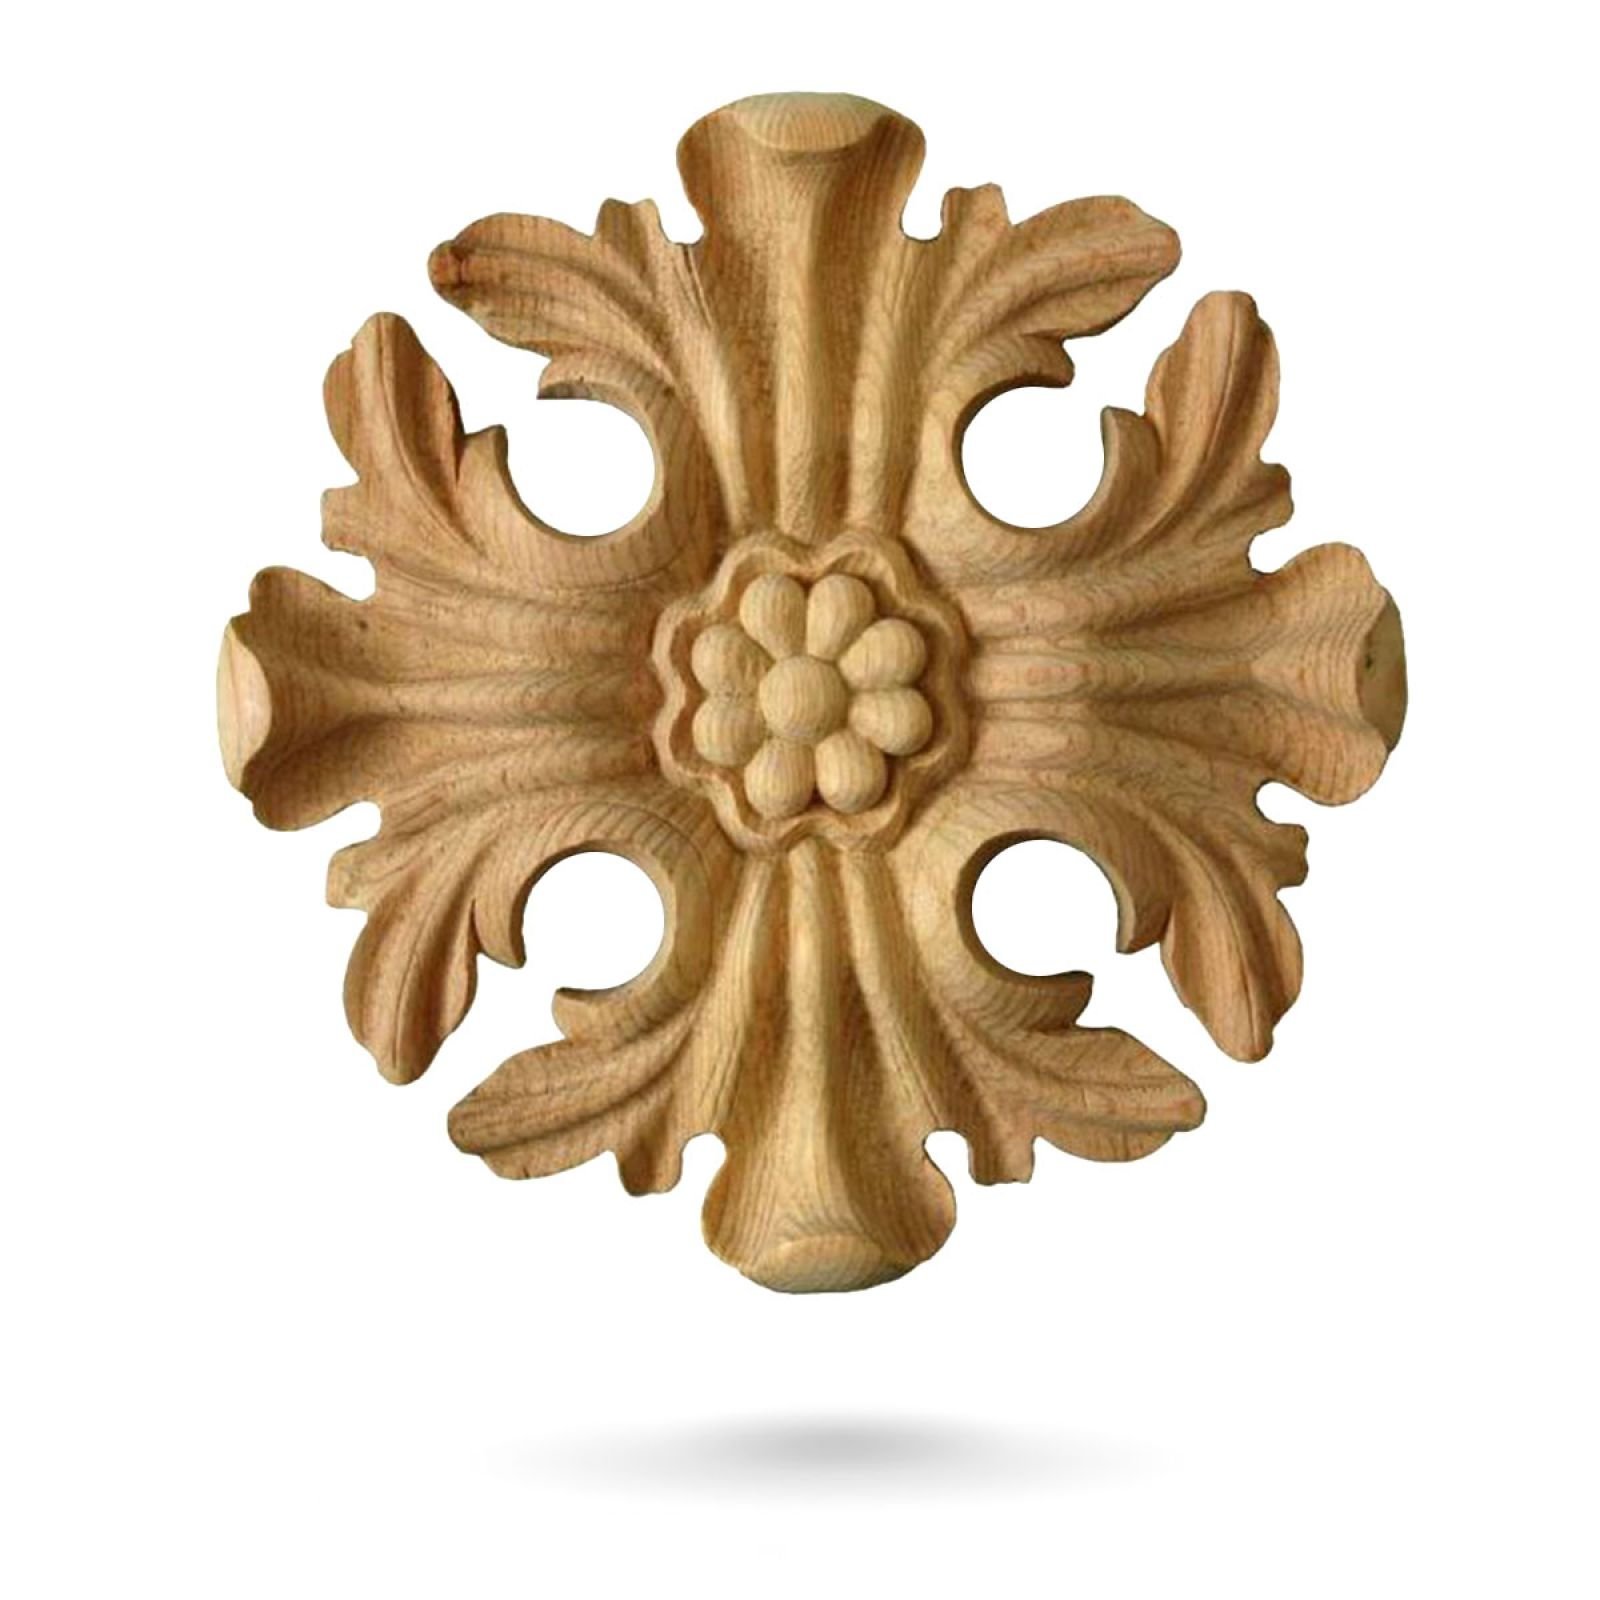 Decorative wooden ceiling rose/circular flower feature